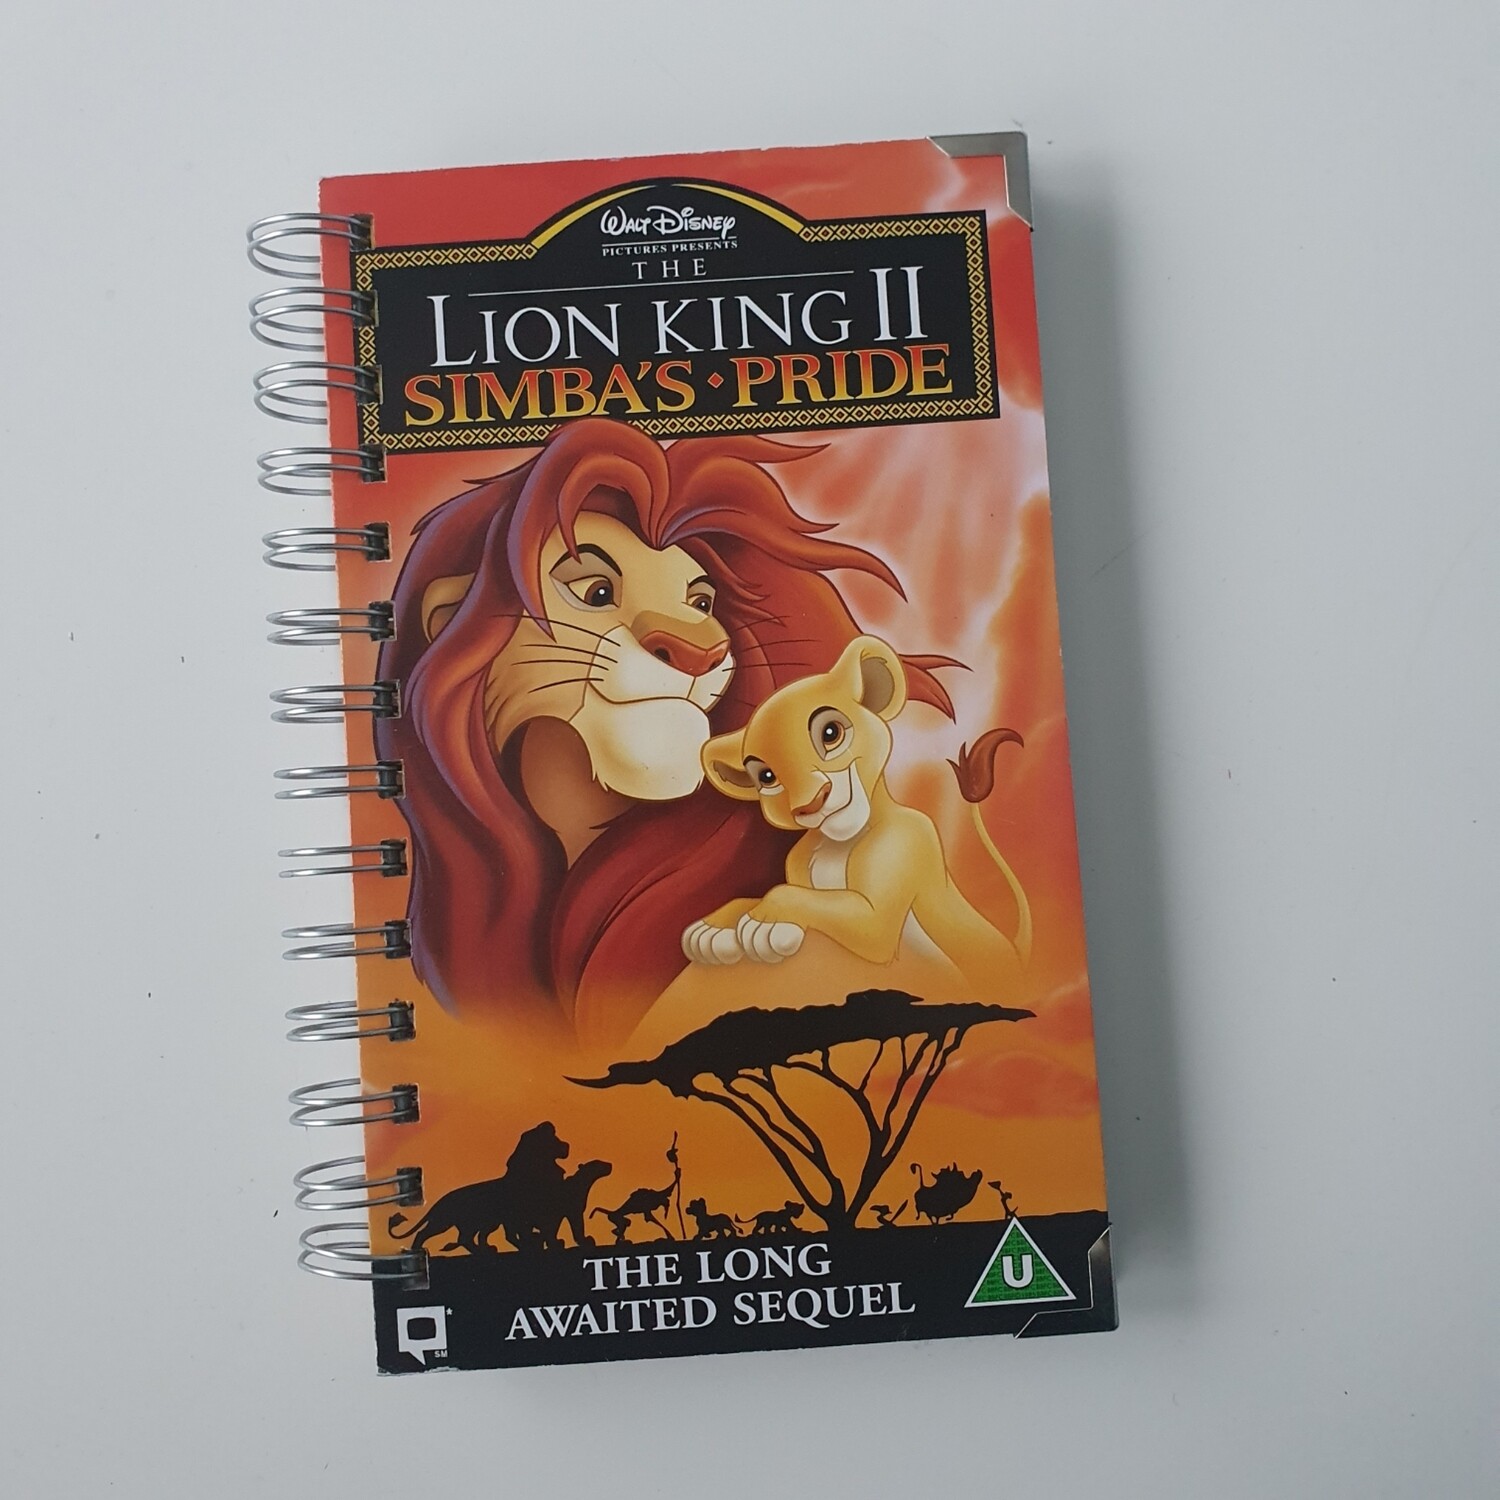 Lion King lined paper Notebook - made from a VHS sleeve, READY TO SHIP